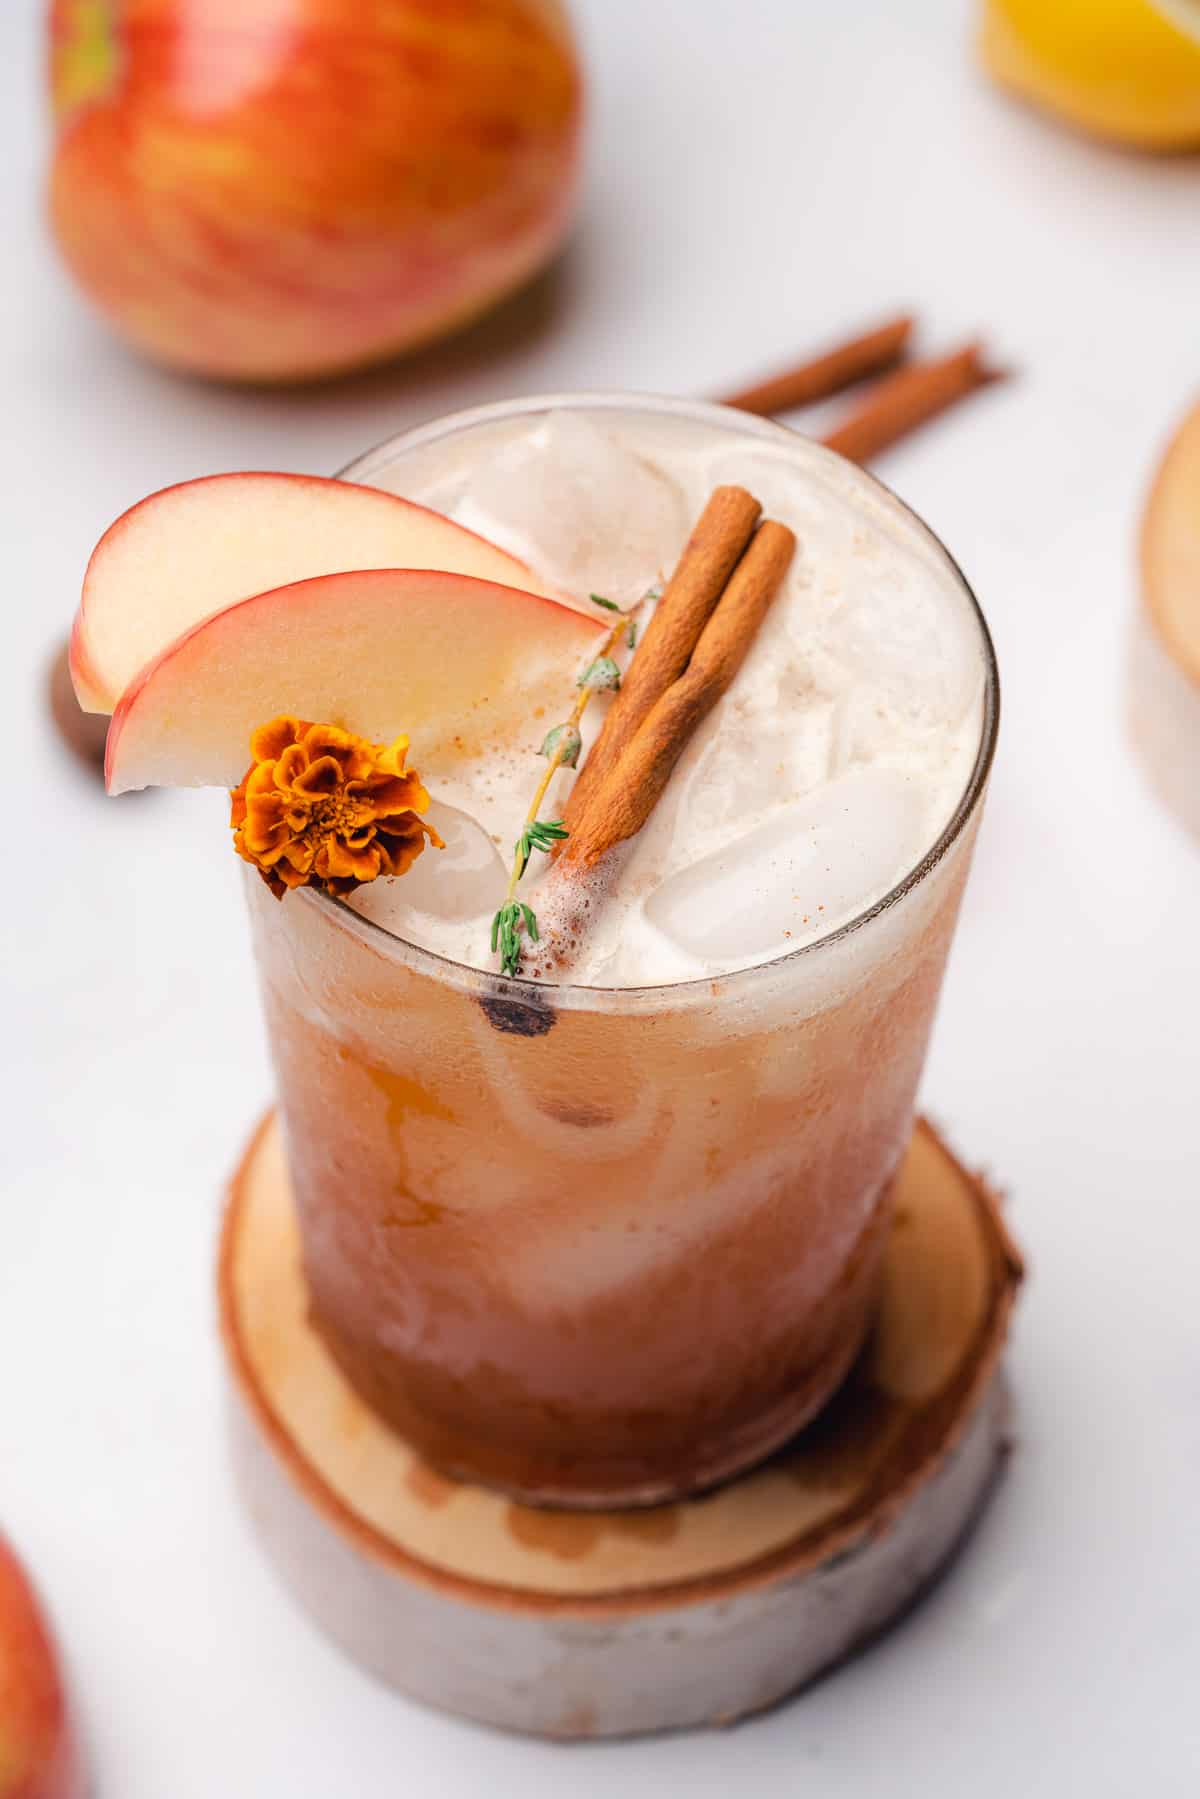 bourbon apple smash garnished with cinnamon sticks, apple slices, thyme, and a marigold flower